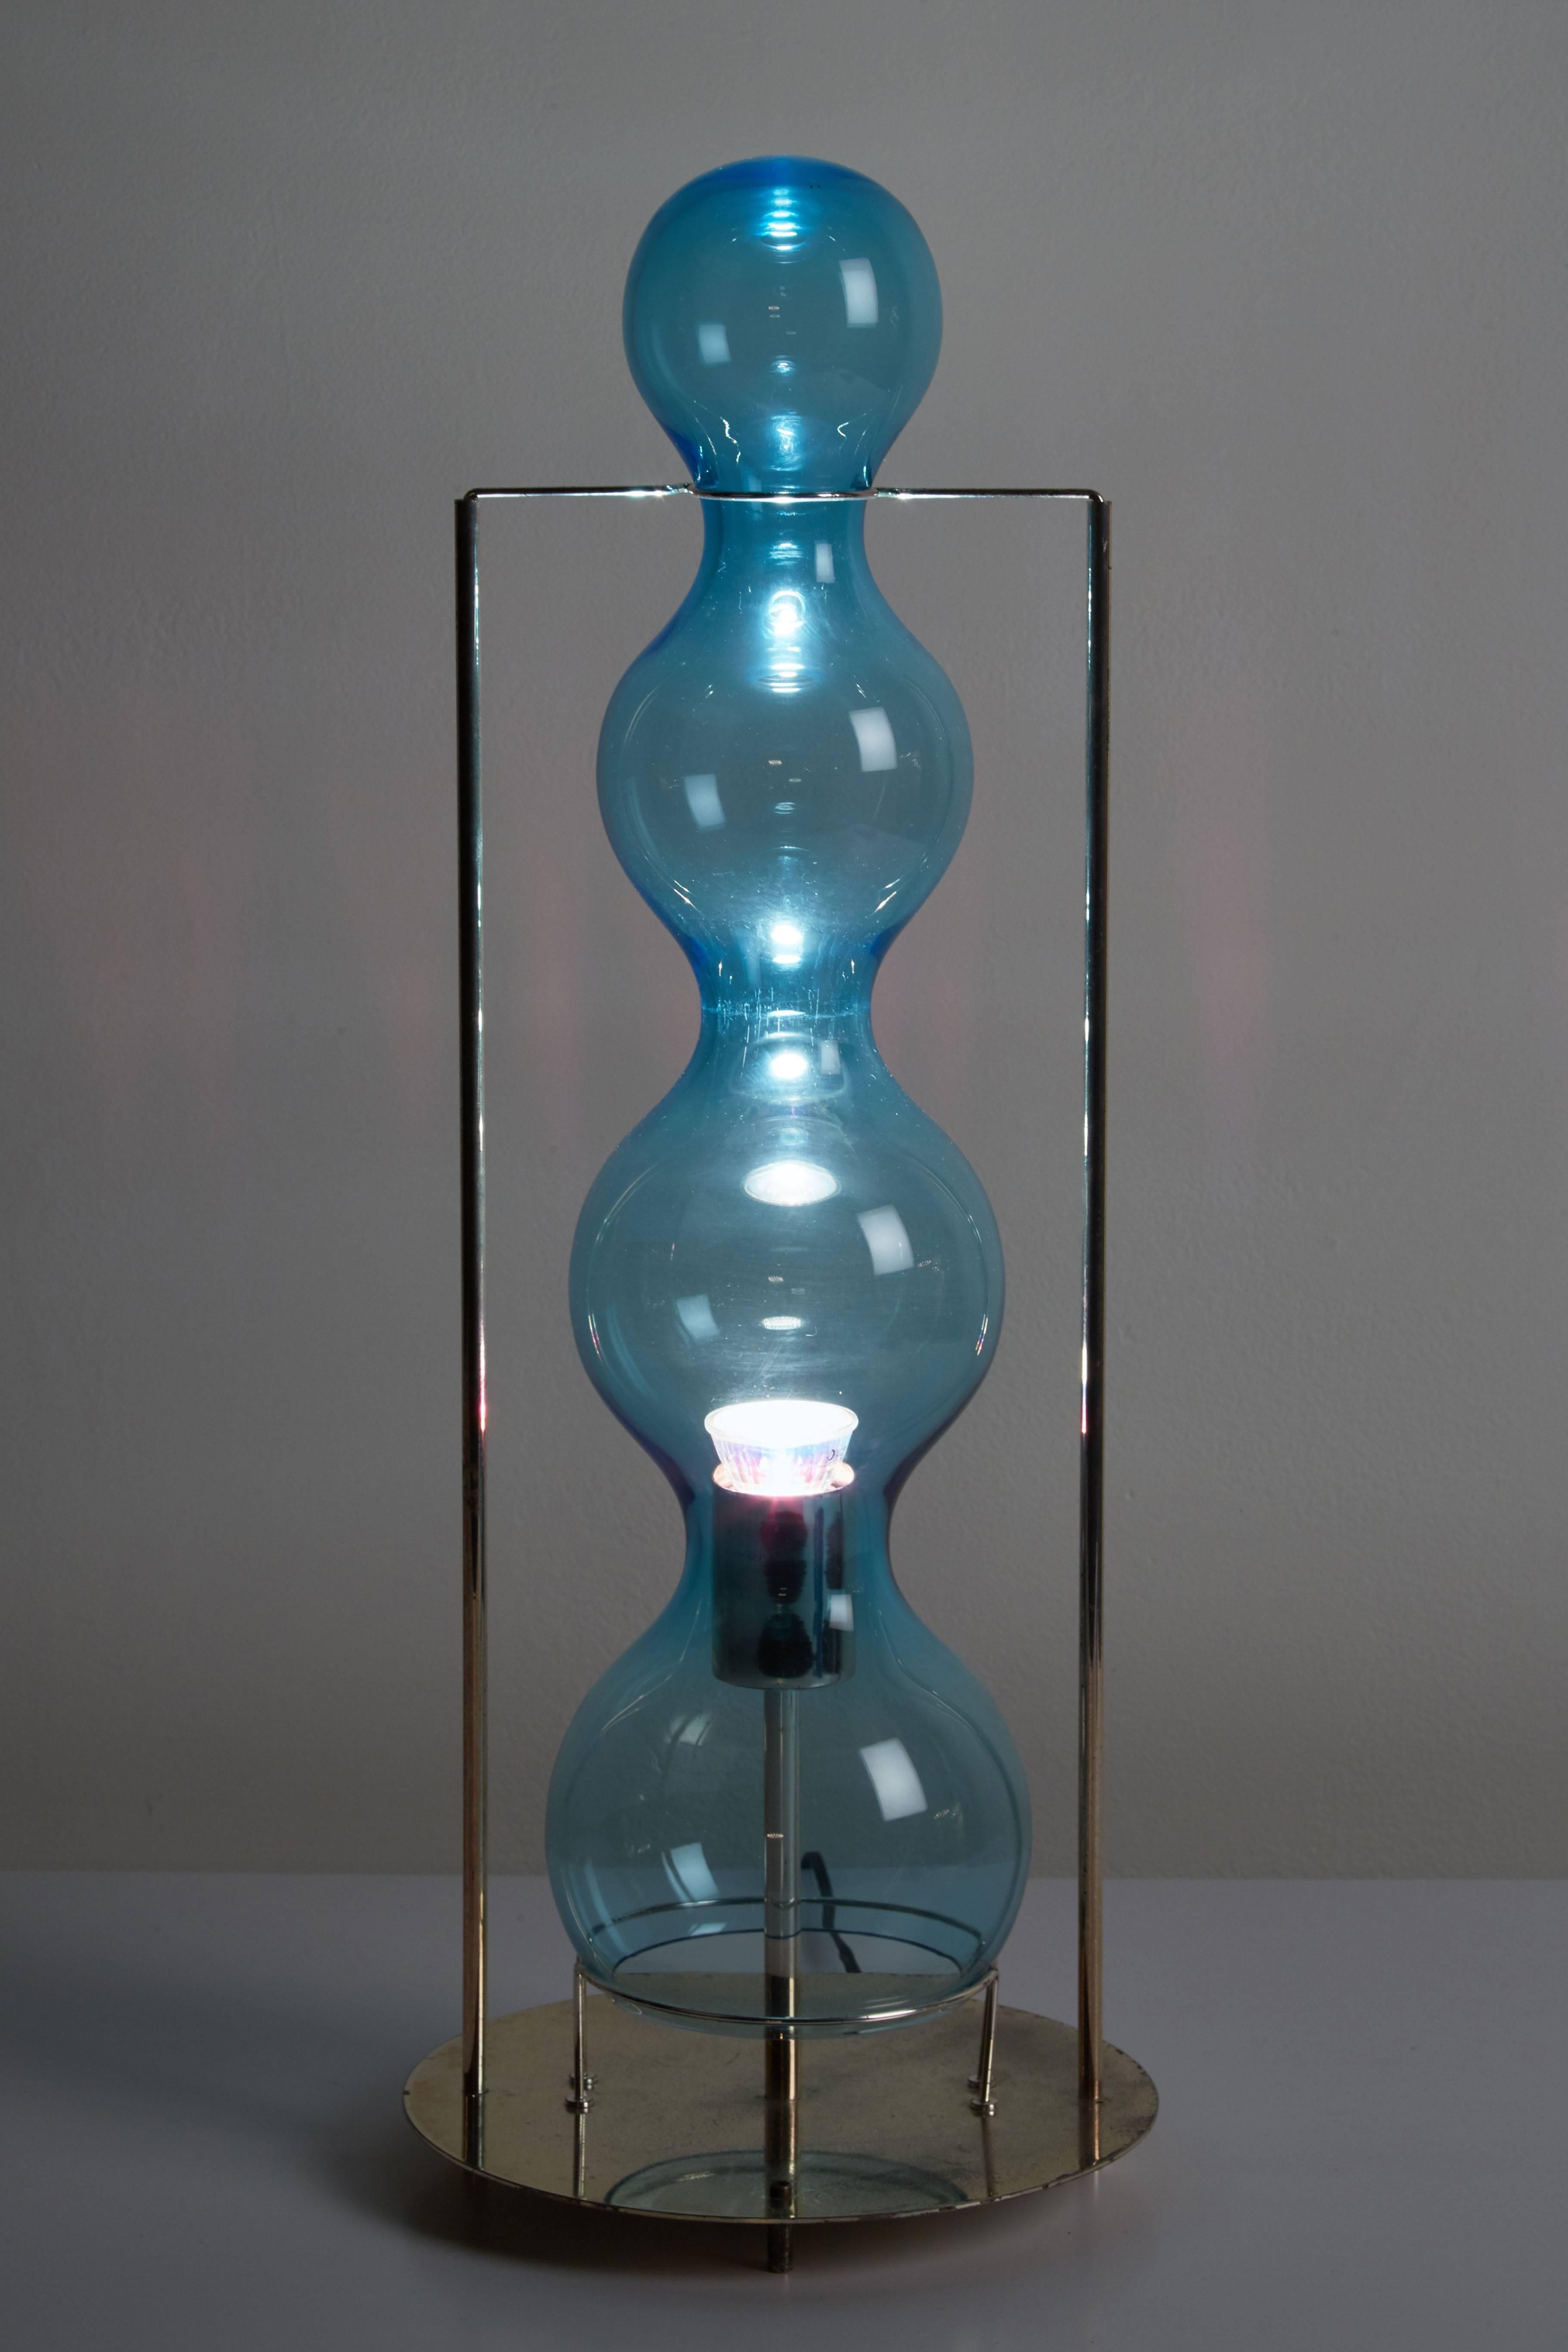 Rare blown glass table lamp by Jeannot Ceruttifor VeArt designed in Italy, 1986 Steel base. VeArt Scorzè, near Venice, Italy was a glass factory founded in 1965 by Ludovico de Santillana and Sergio Biliotti from Venini & Co, which is the most famous